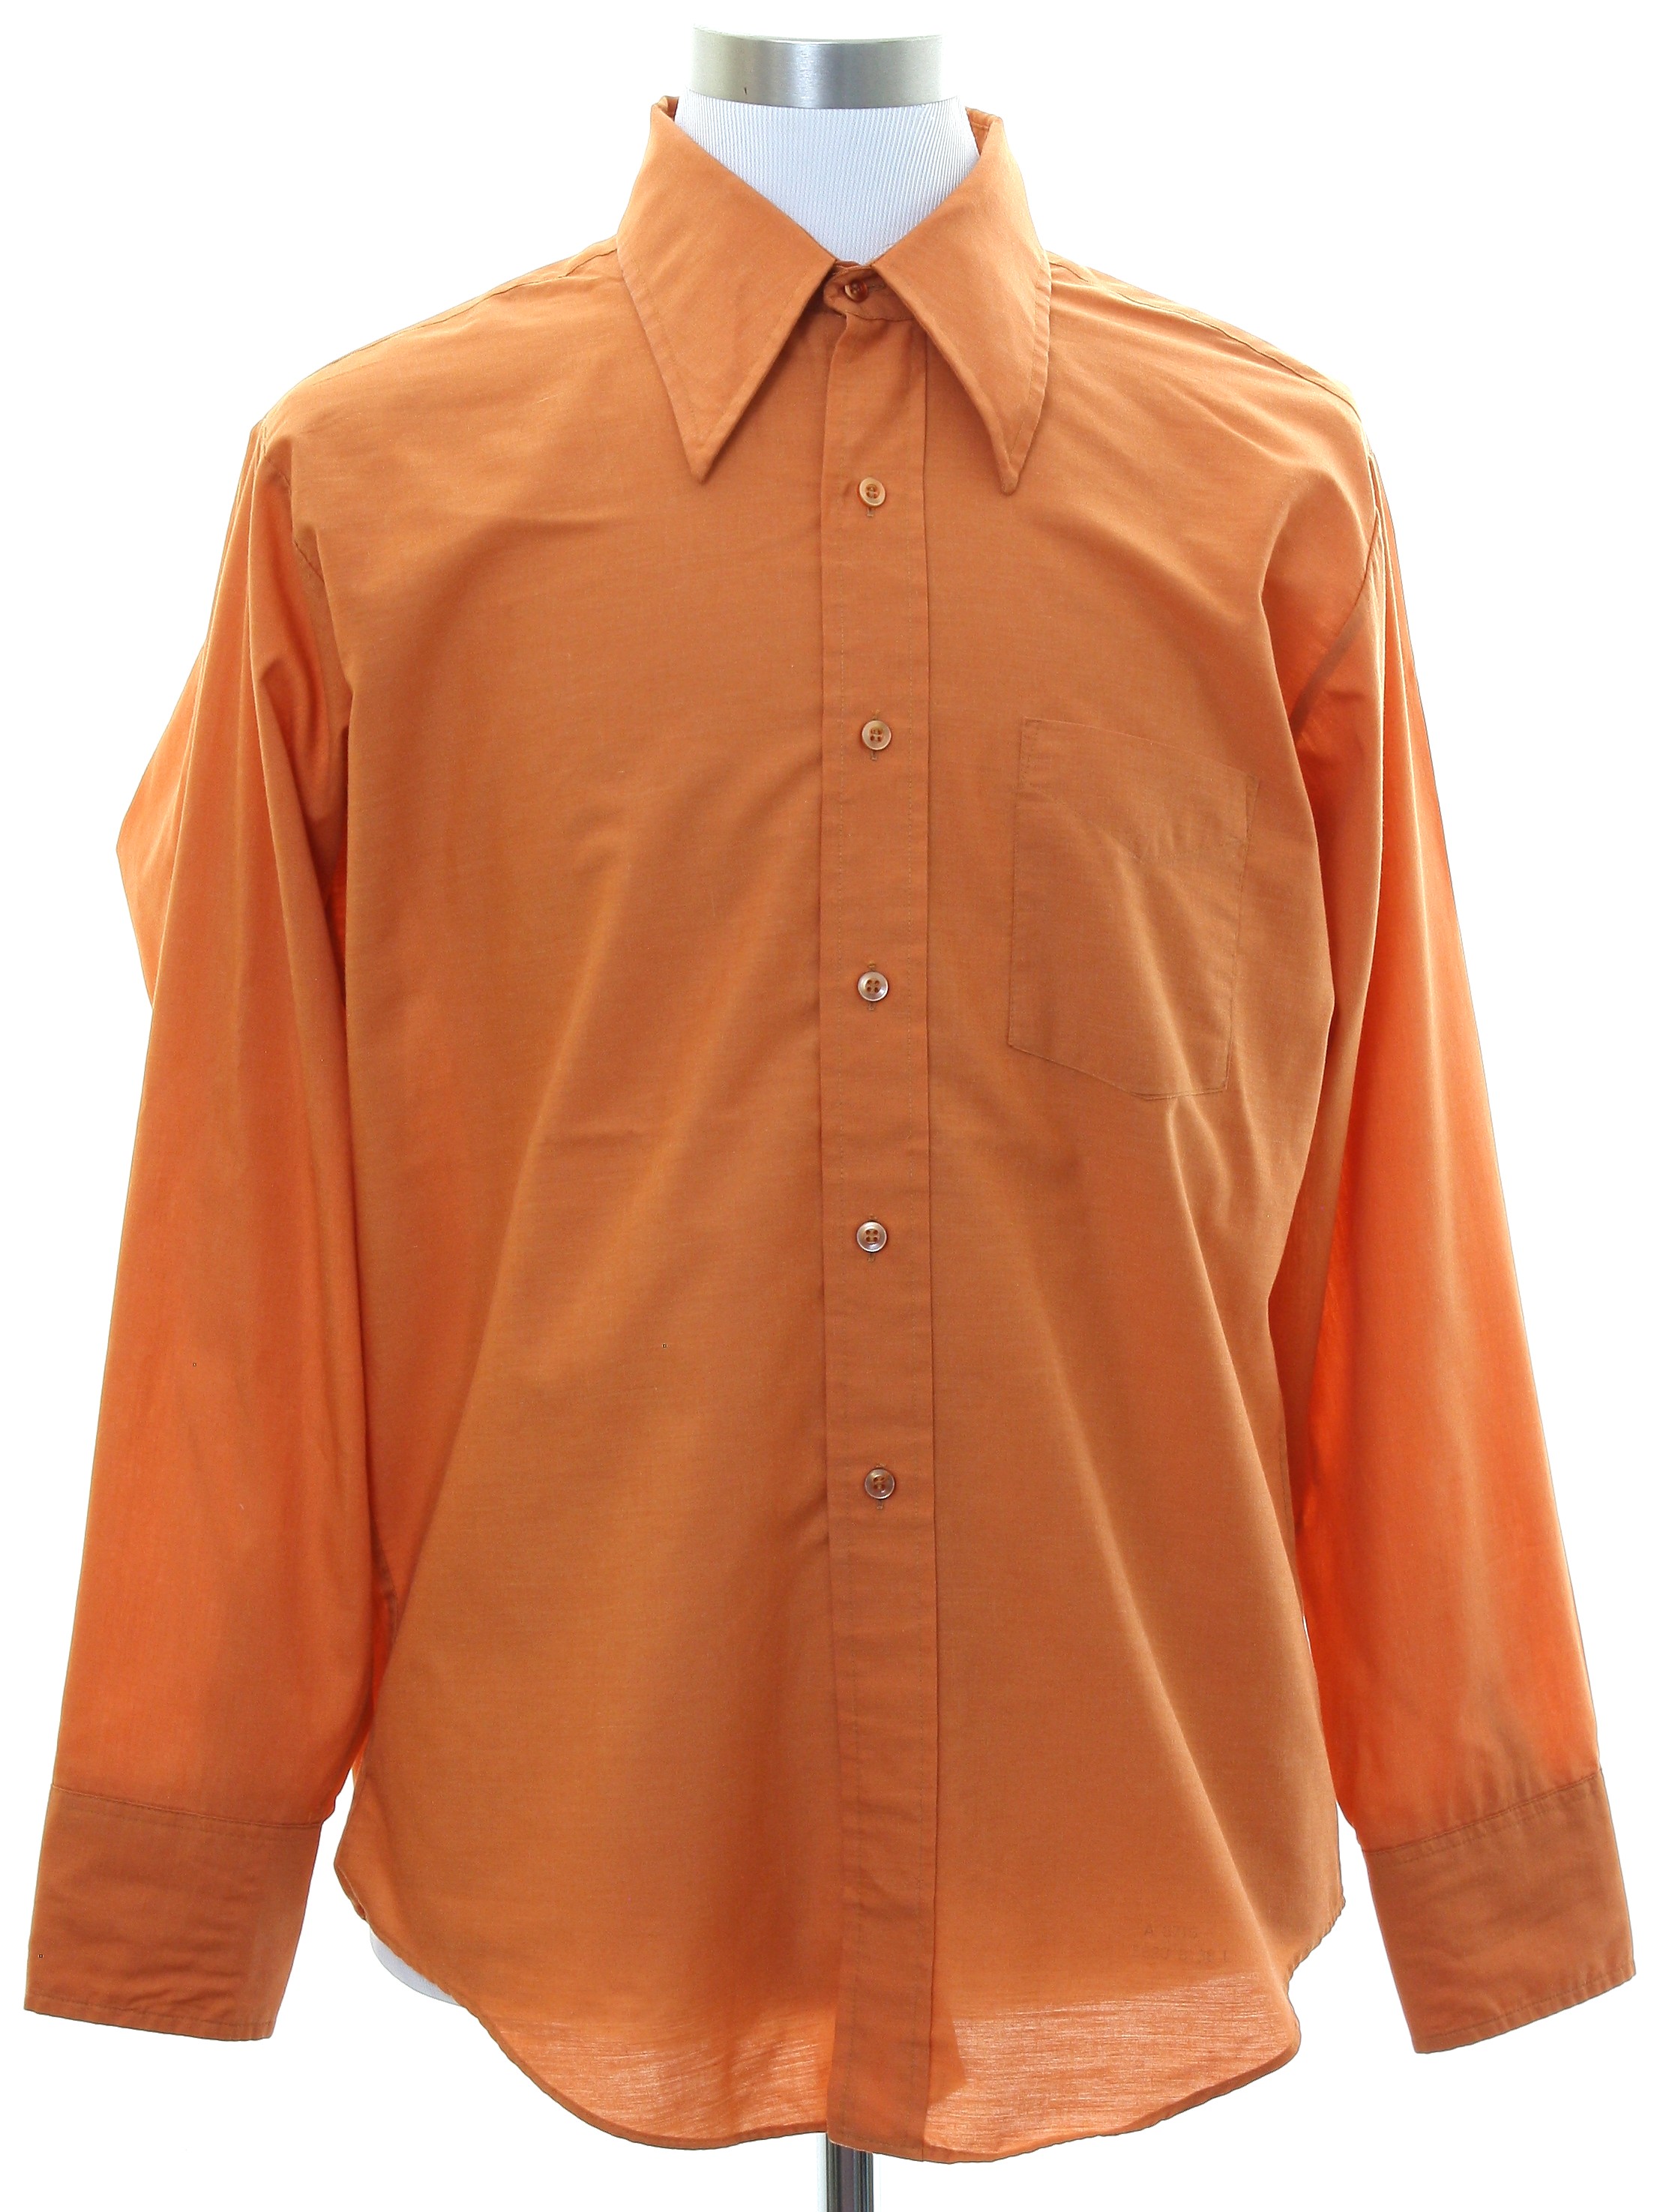 B. V. D. Sixties Vintage Shirt: Late 60s or early 70s -B. V. D.- Mens ...